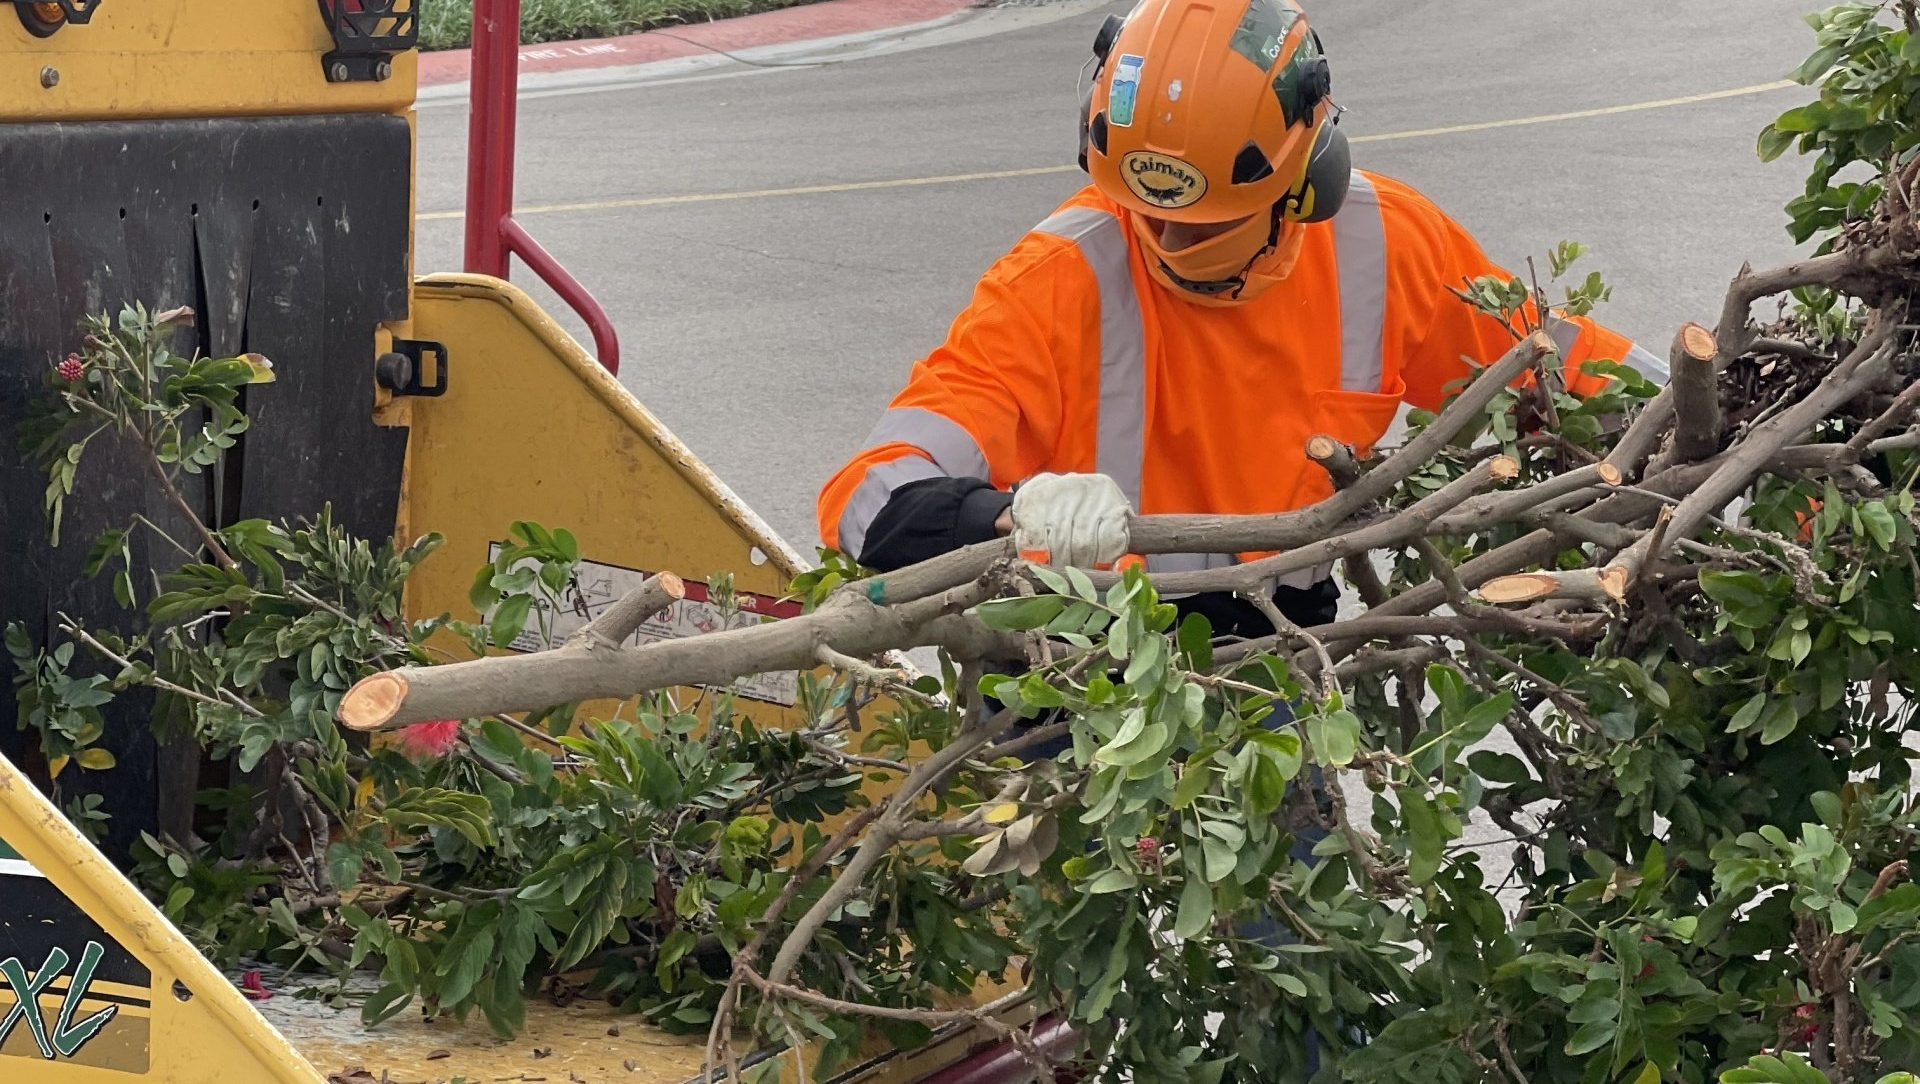 tree service cleanup and brush chipping san diego